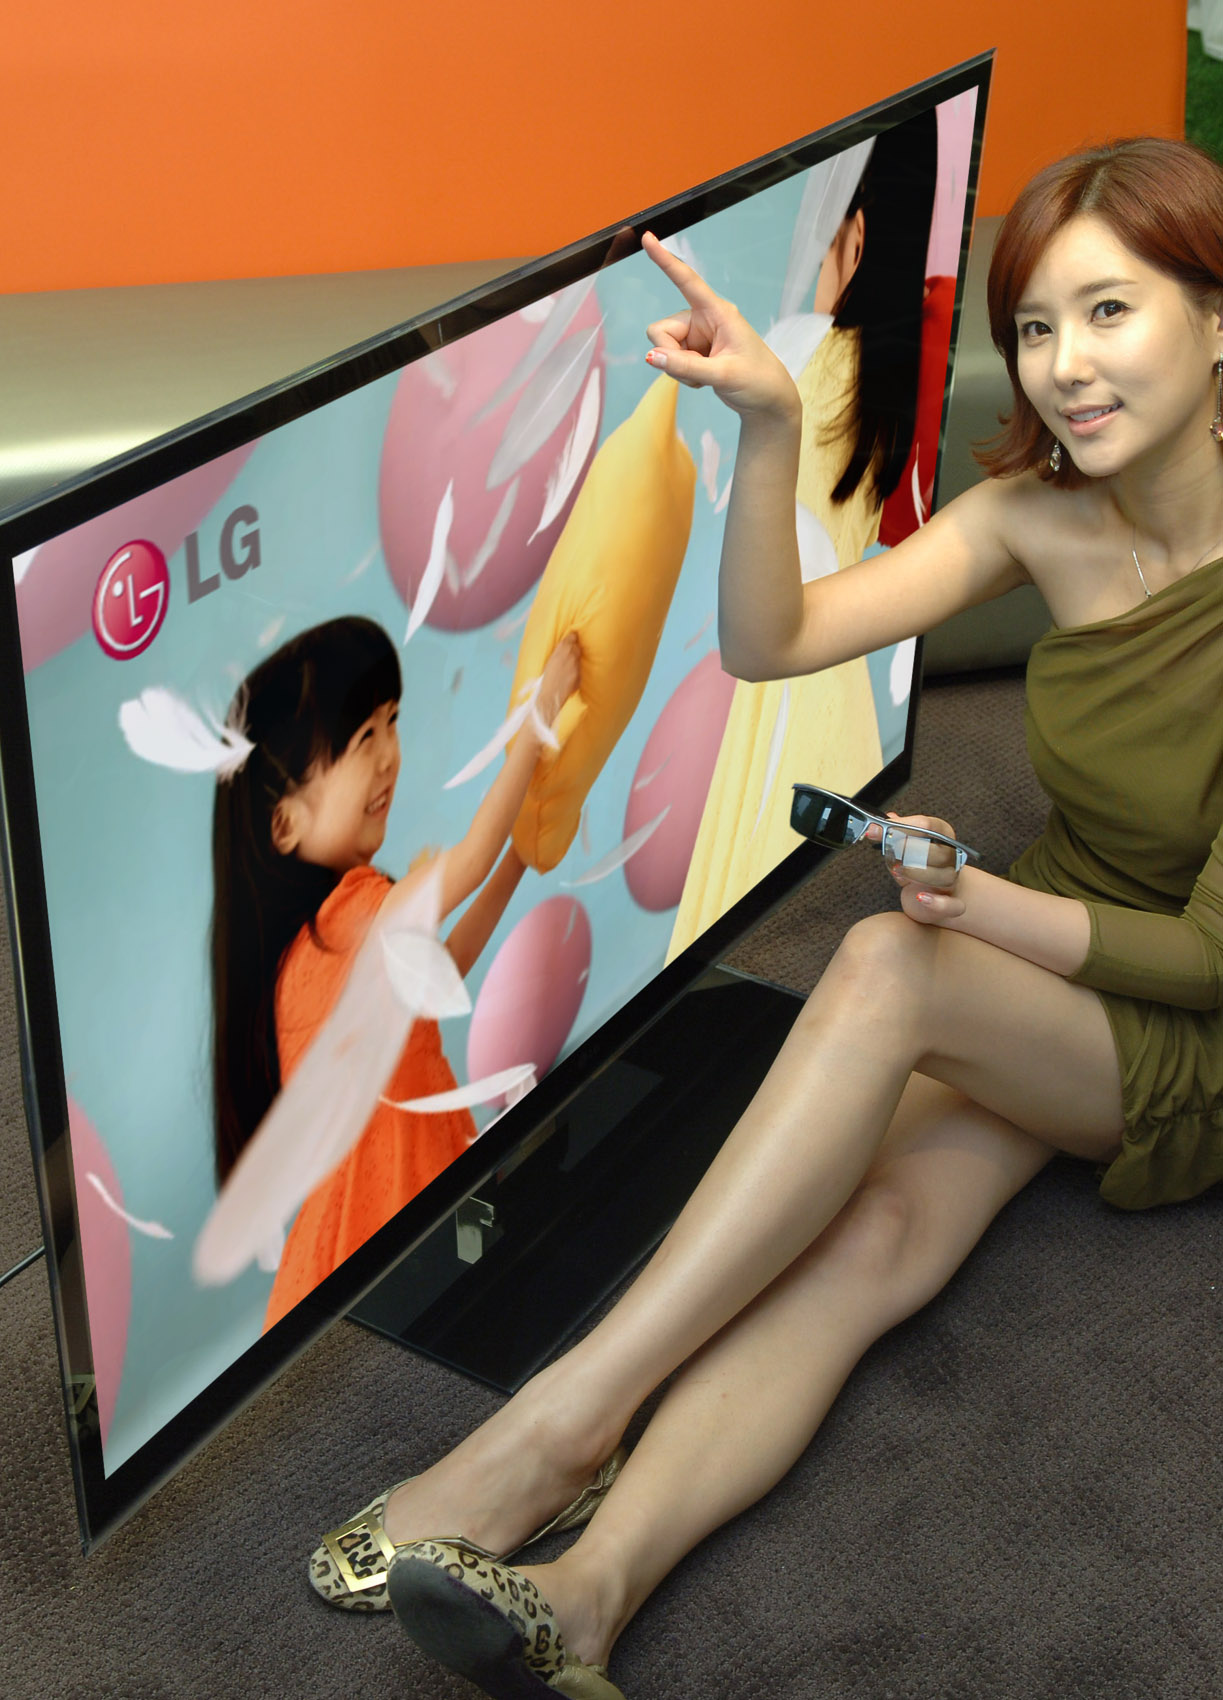 A model lies on the floor next to a LS980W LG CINEMA 3D TV